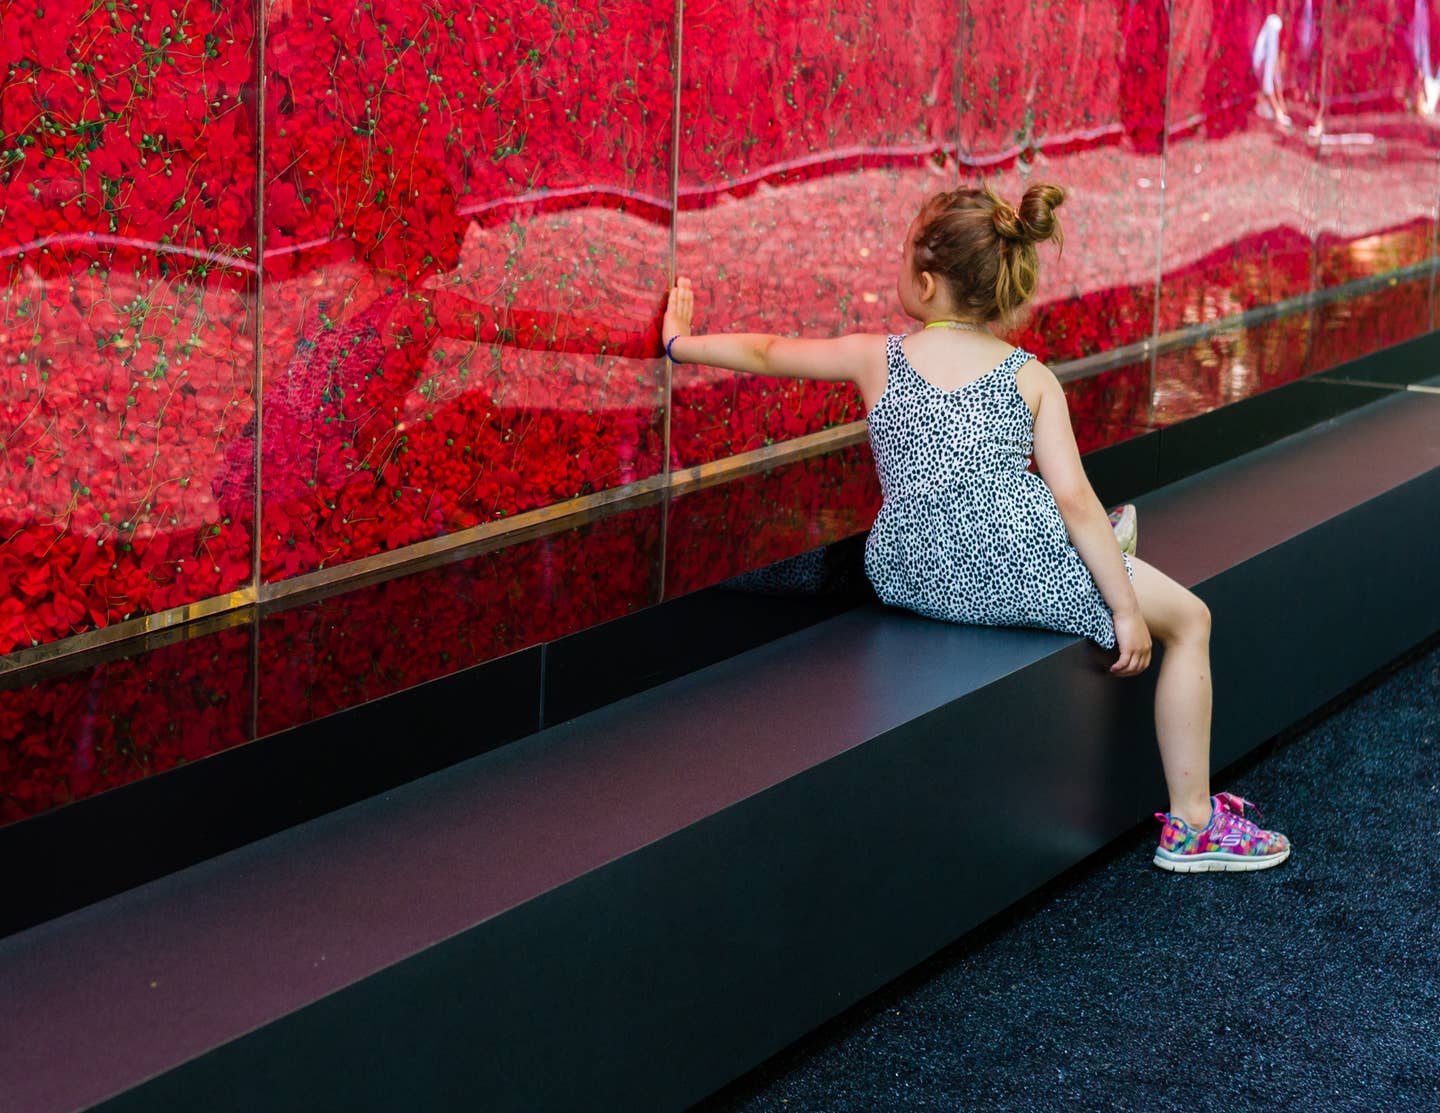 Girl visits The Poppy Memorial, a temporary memorial made by USAA consisting of more than 645,000 poppy flowers, with each flower honoring a fallen military servicemember since World War I, is seen at the National Mall on May 25, 2018 in Washington, D.C. (Photo by Rodney Choice/AP Images for USAA) Photo provided by USAA.